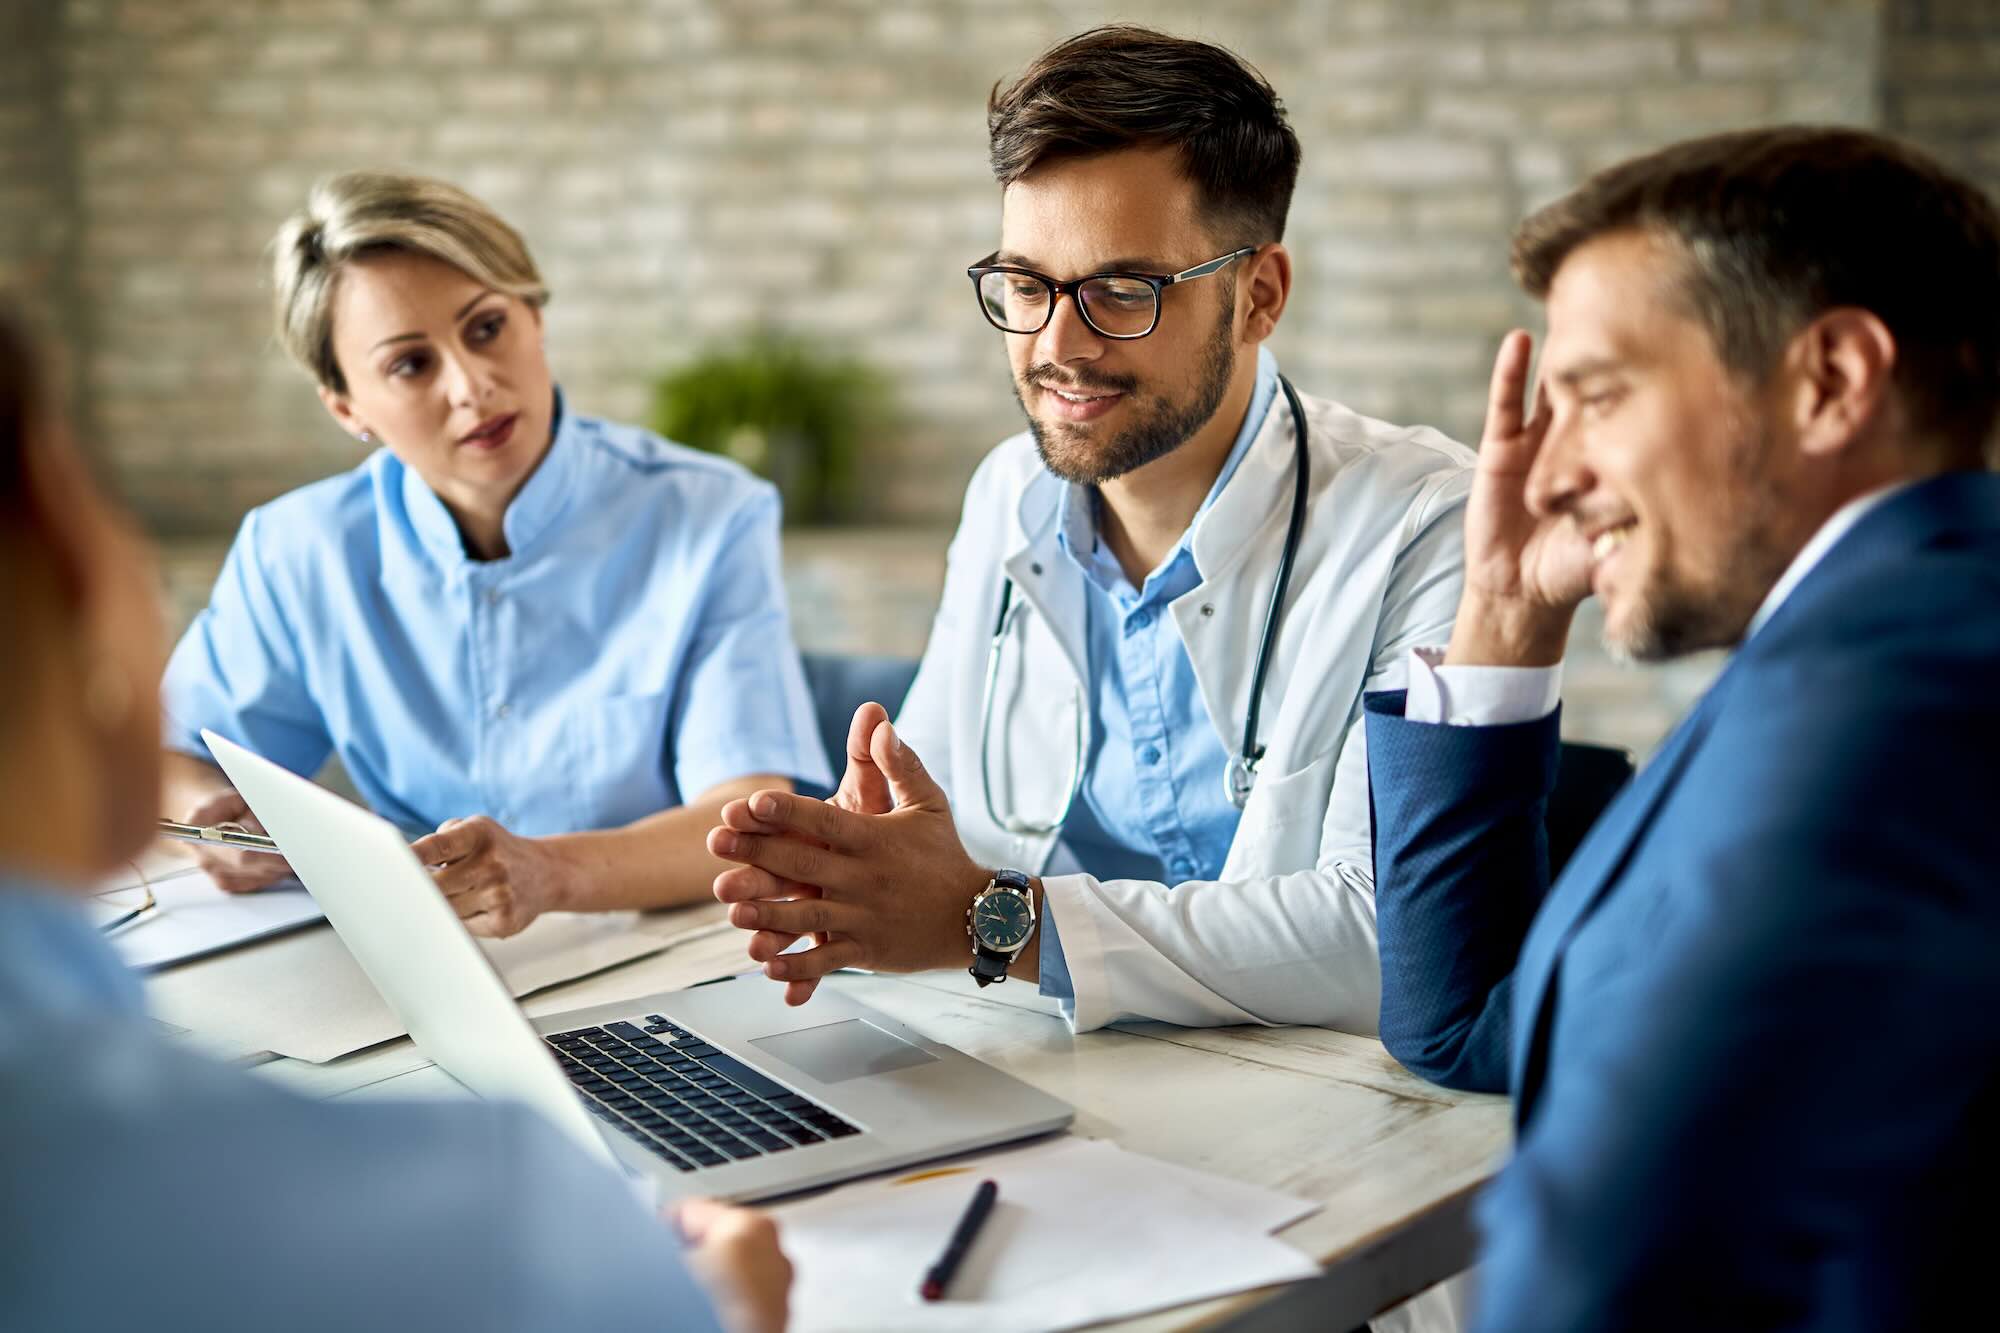 Doctor working with an SEO team to attract new patients